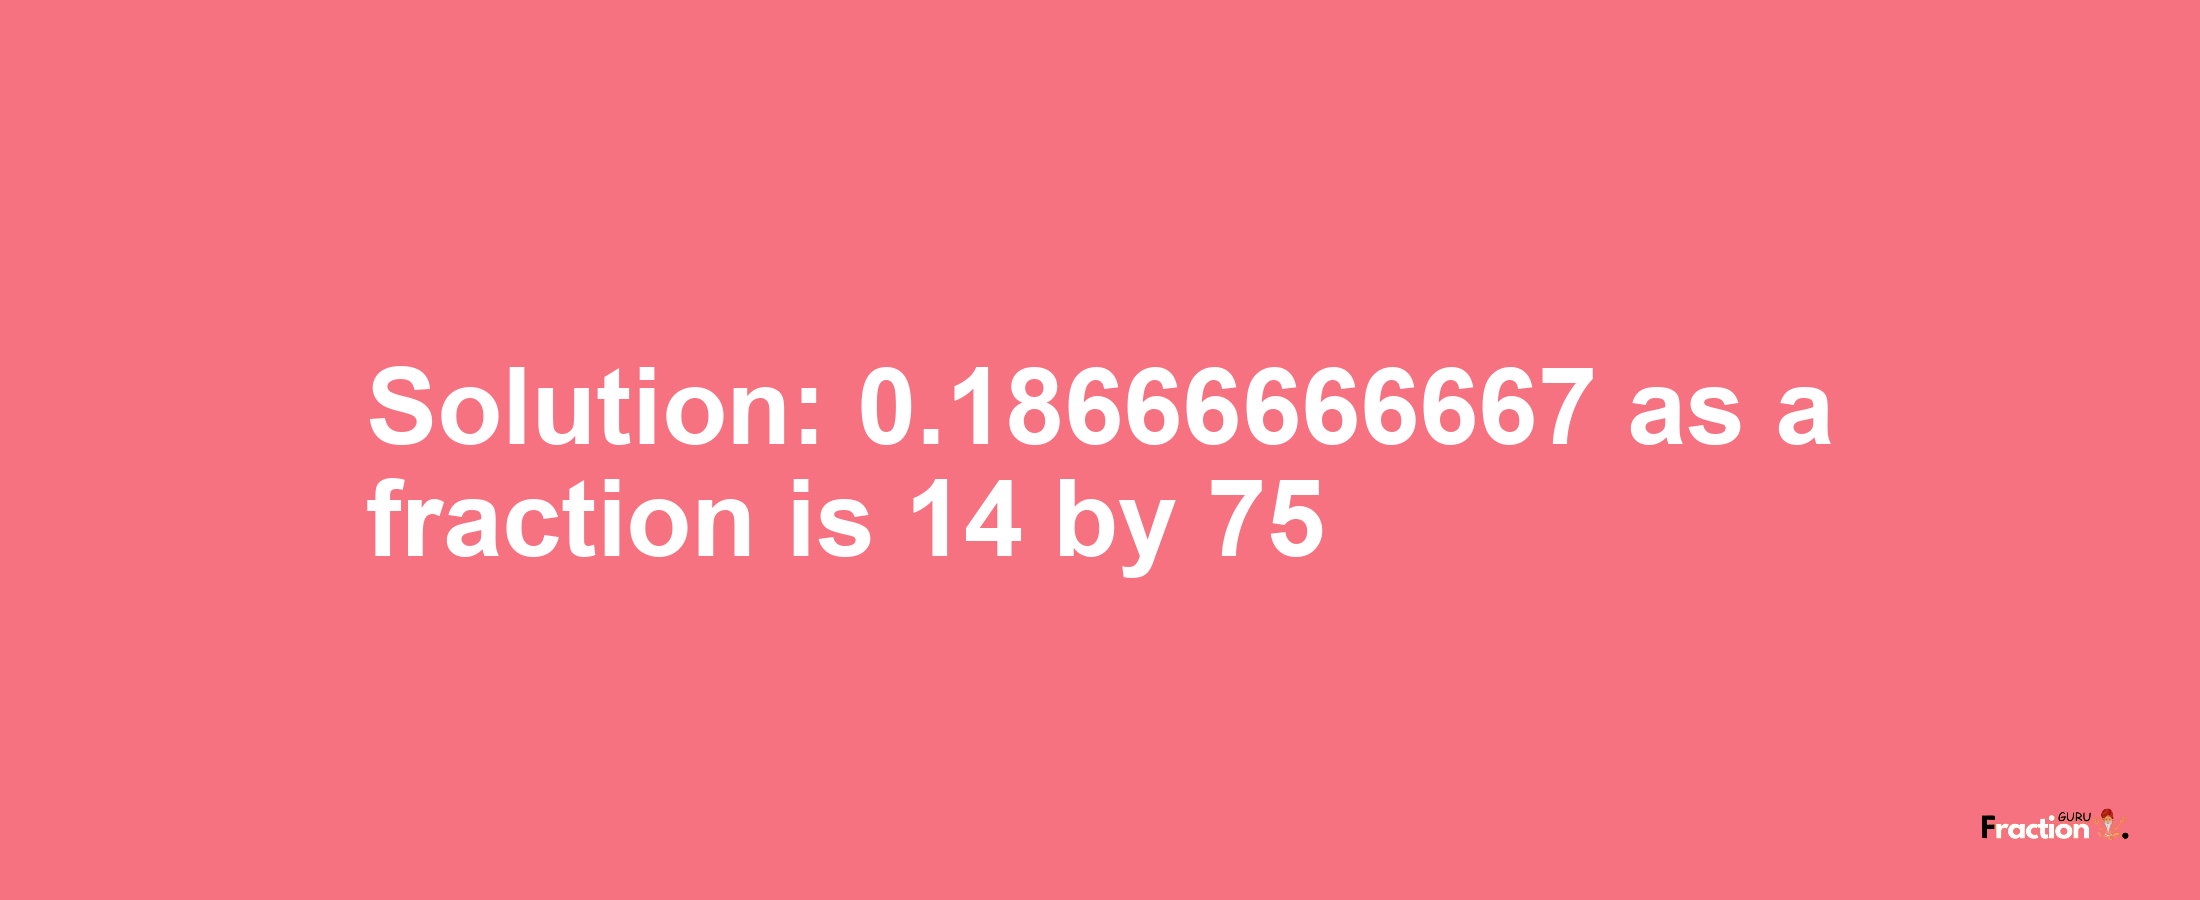 Solution:0.18666666667 as a fraction is 14/75